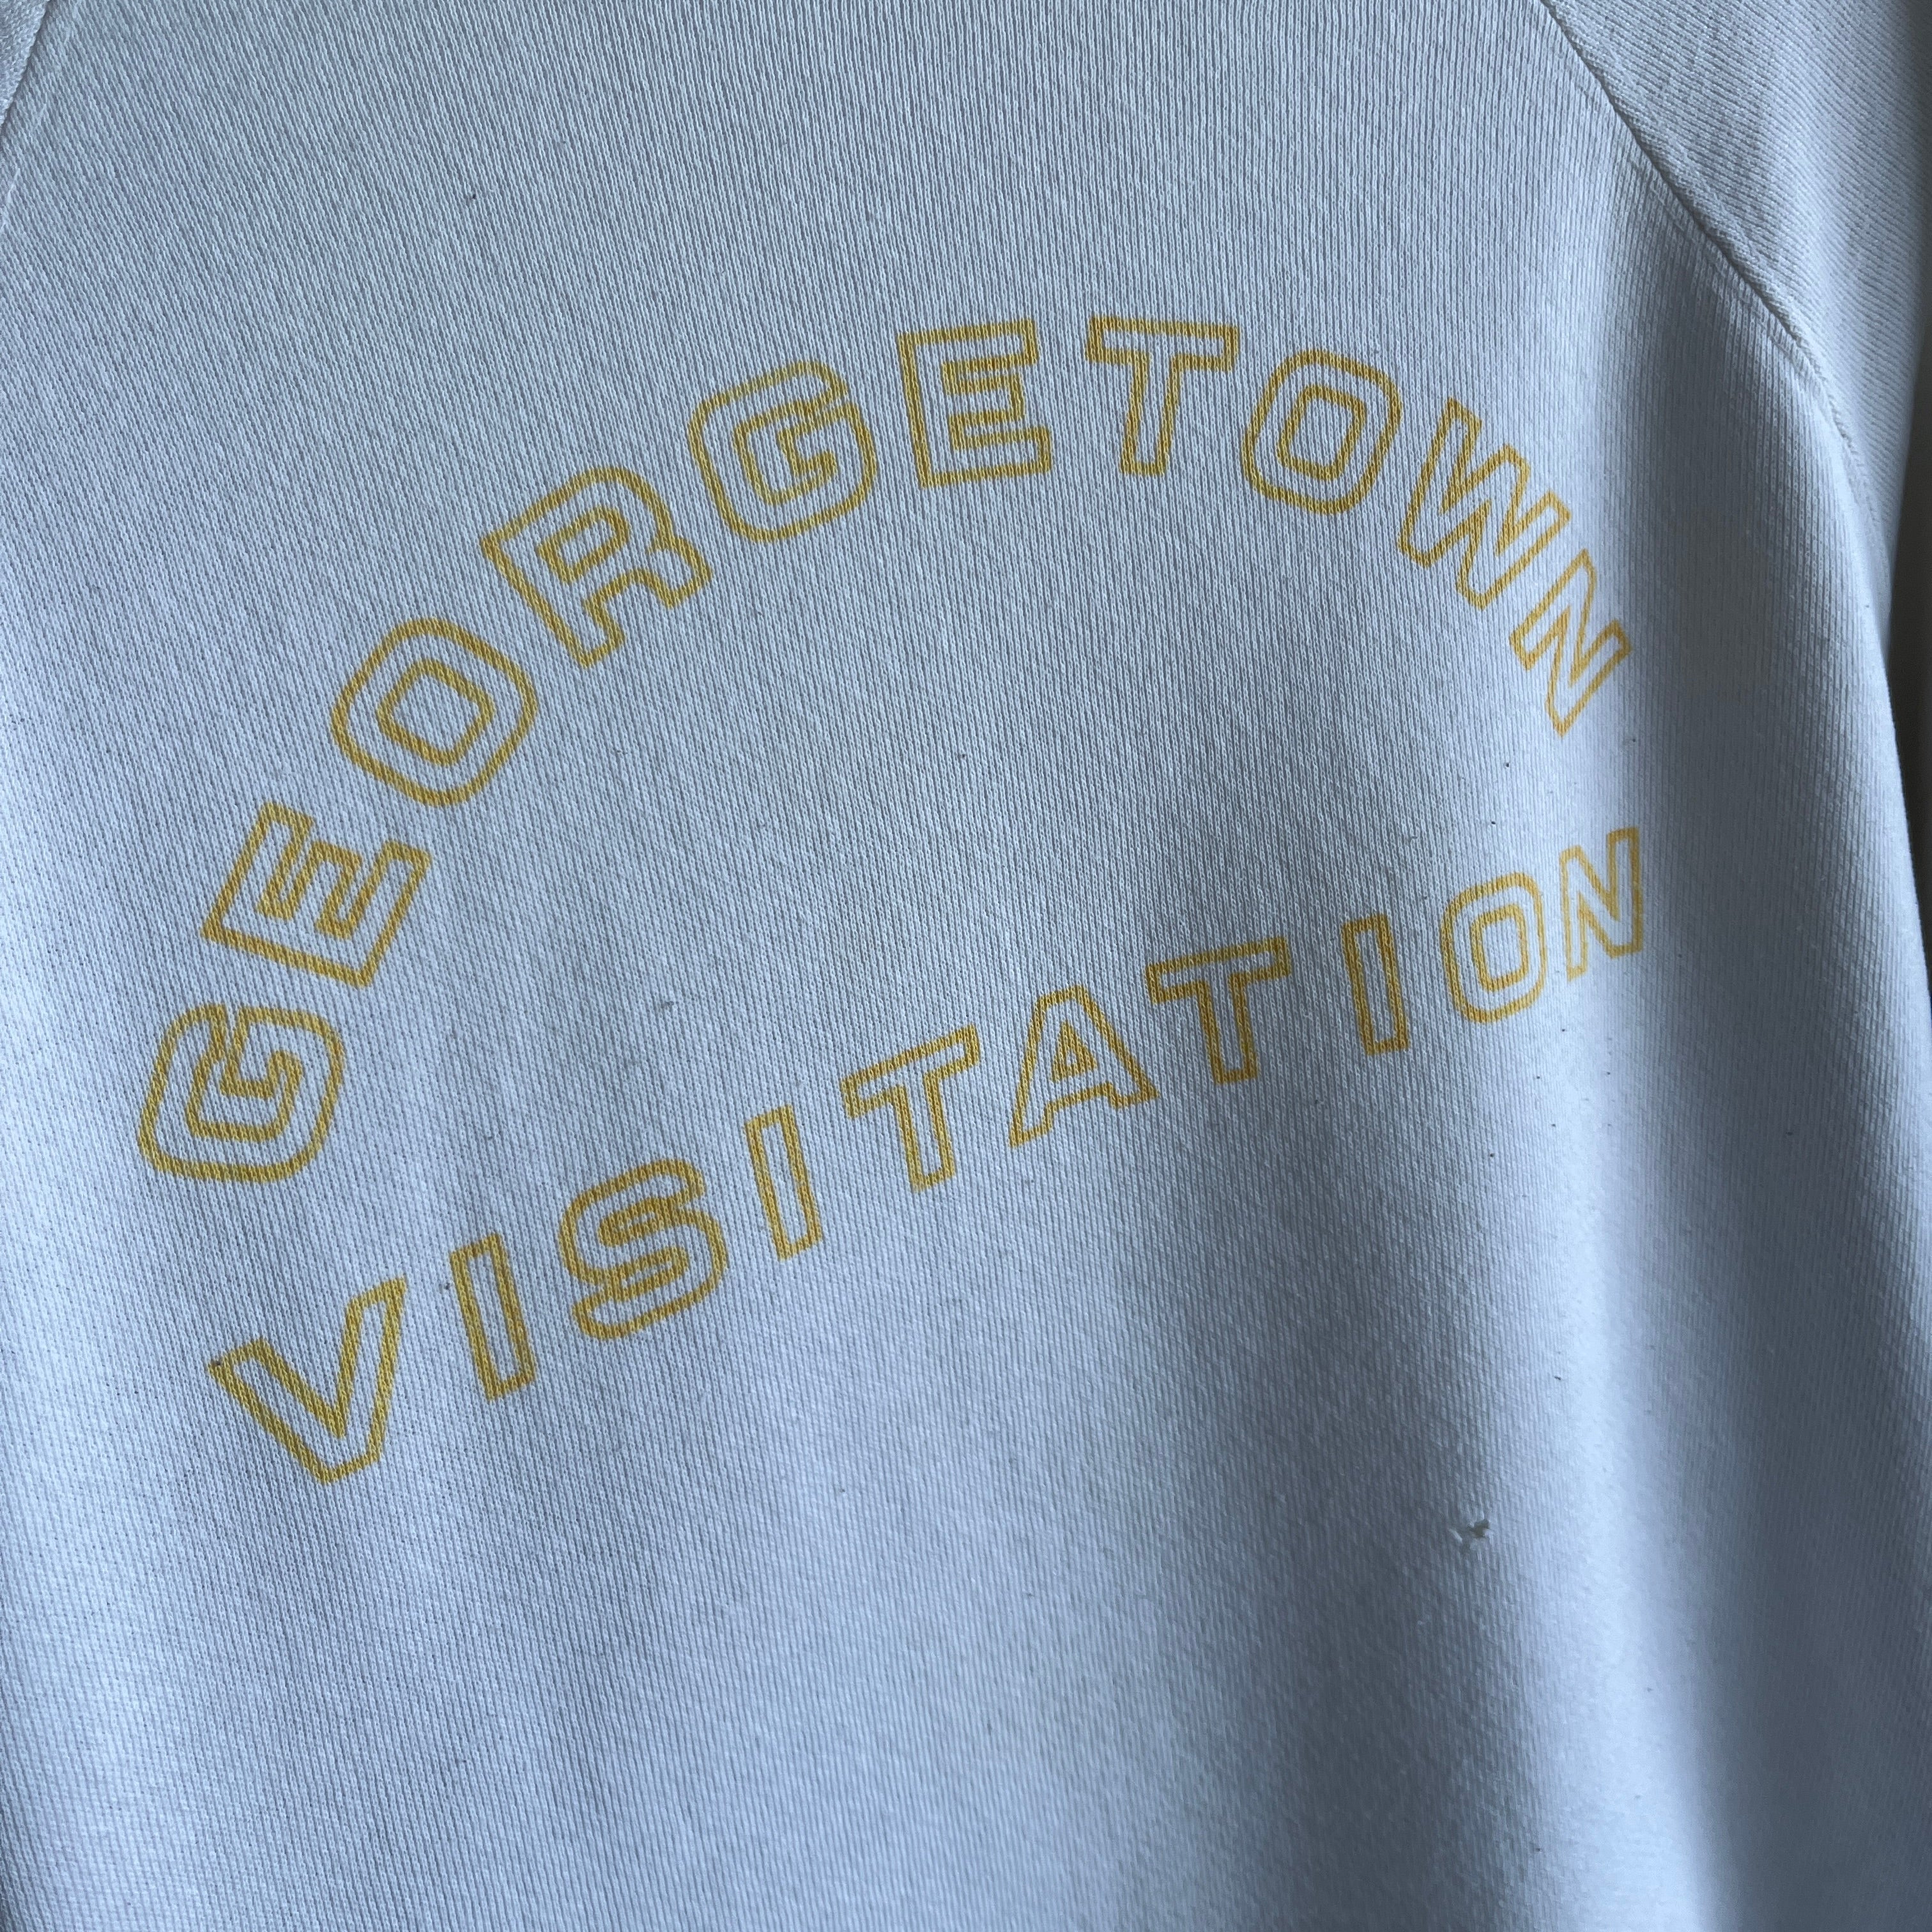 1980s Thinned Out Beyond Georgetown Visitation Sweatshirt